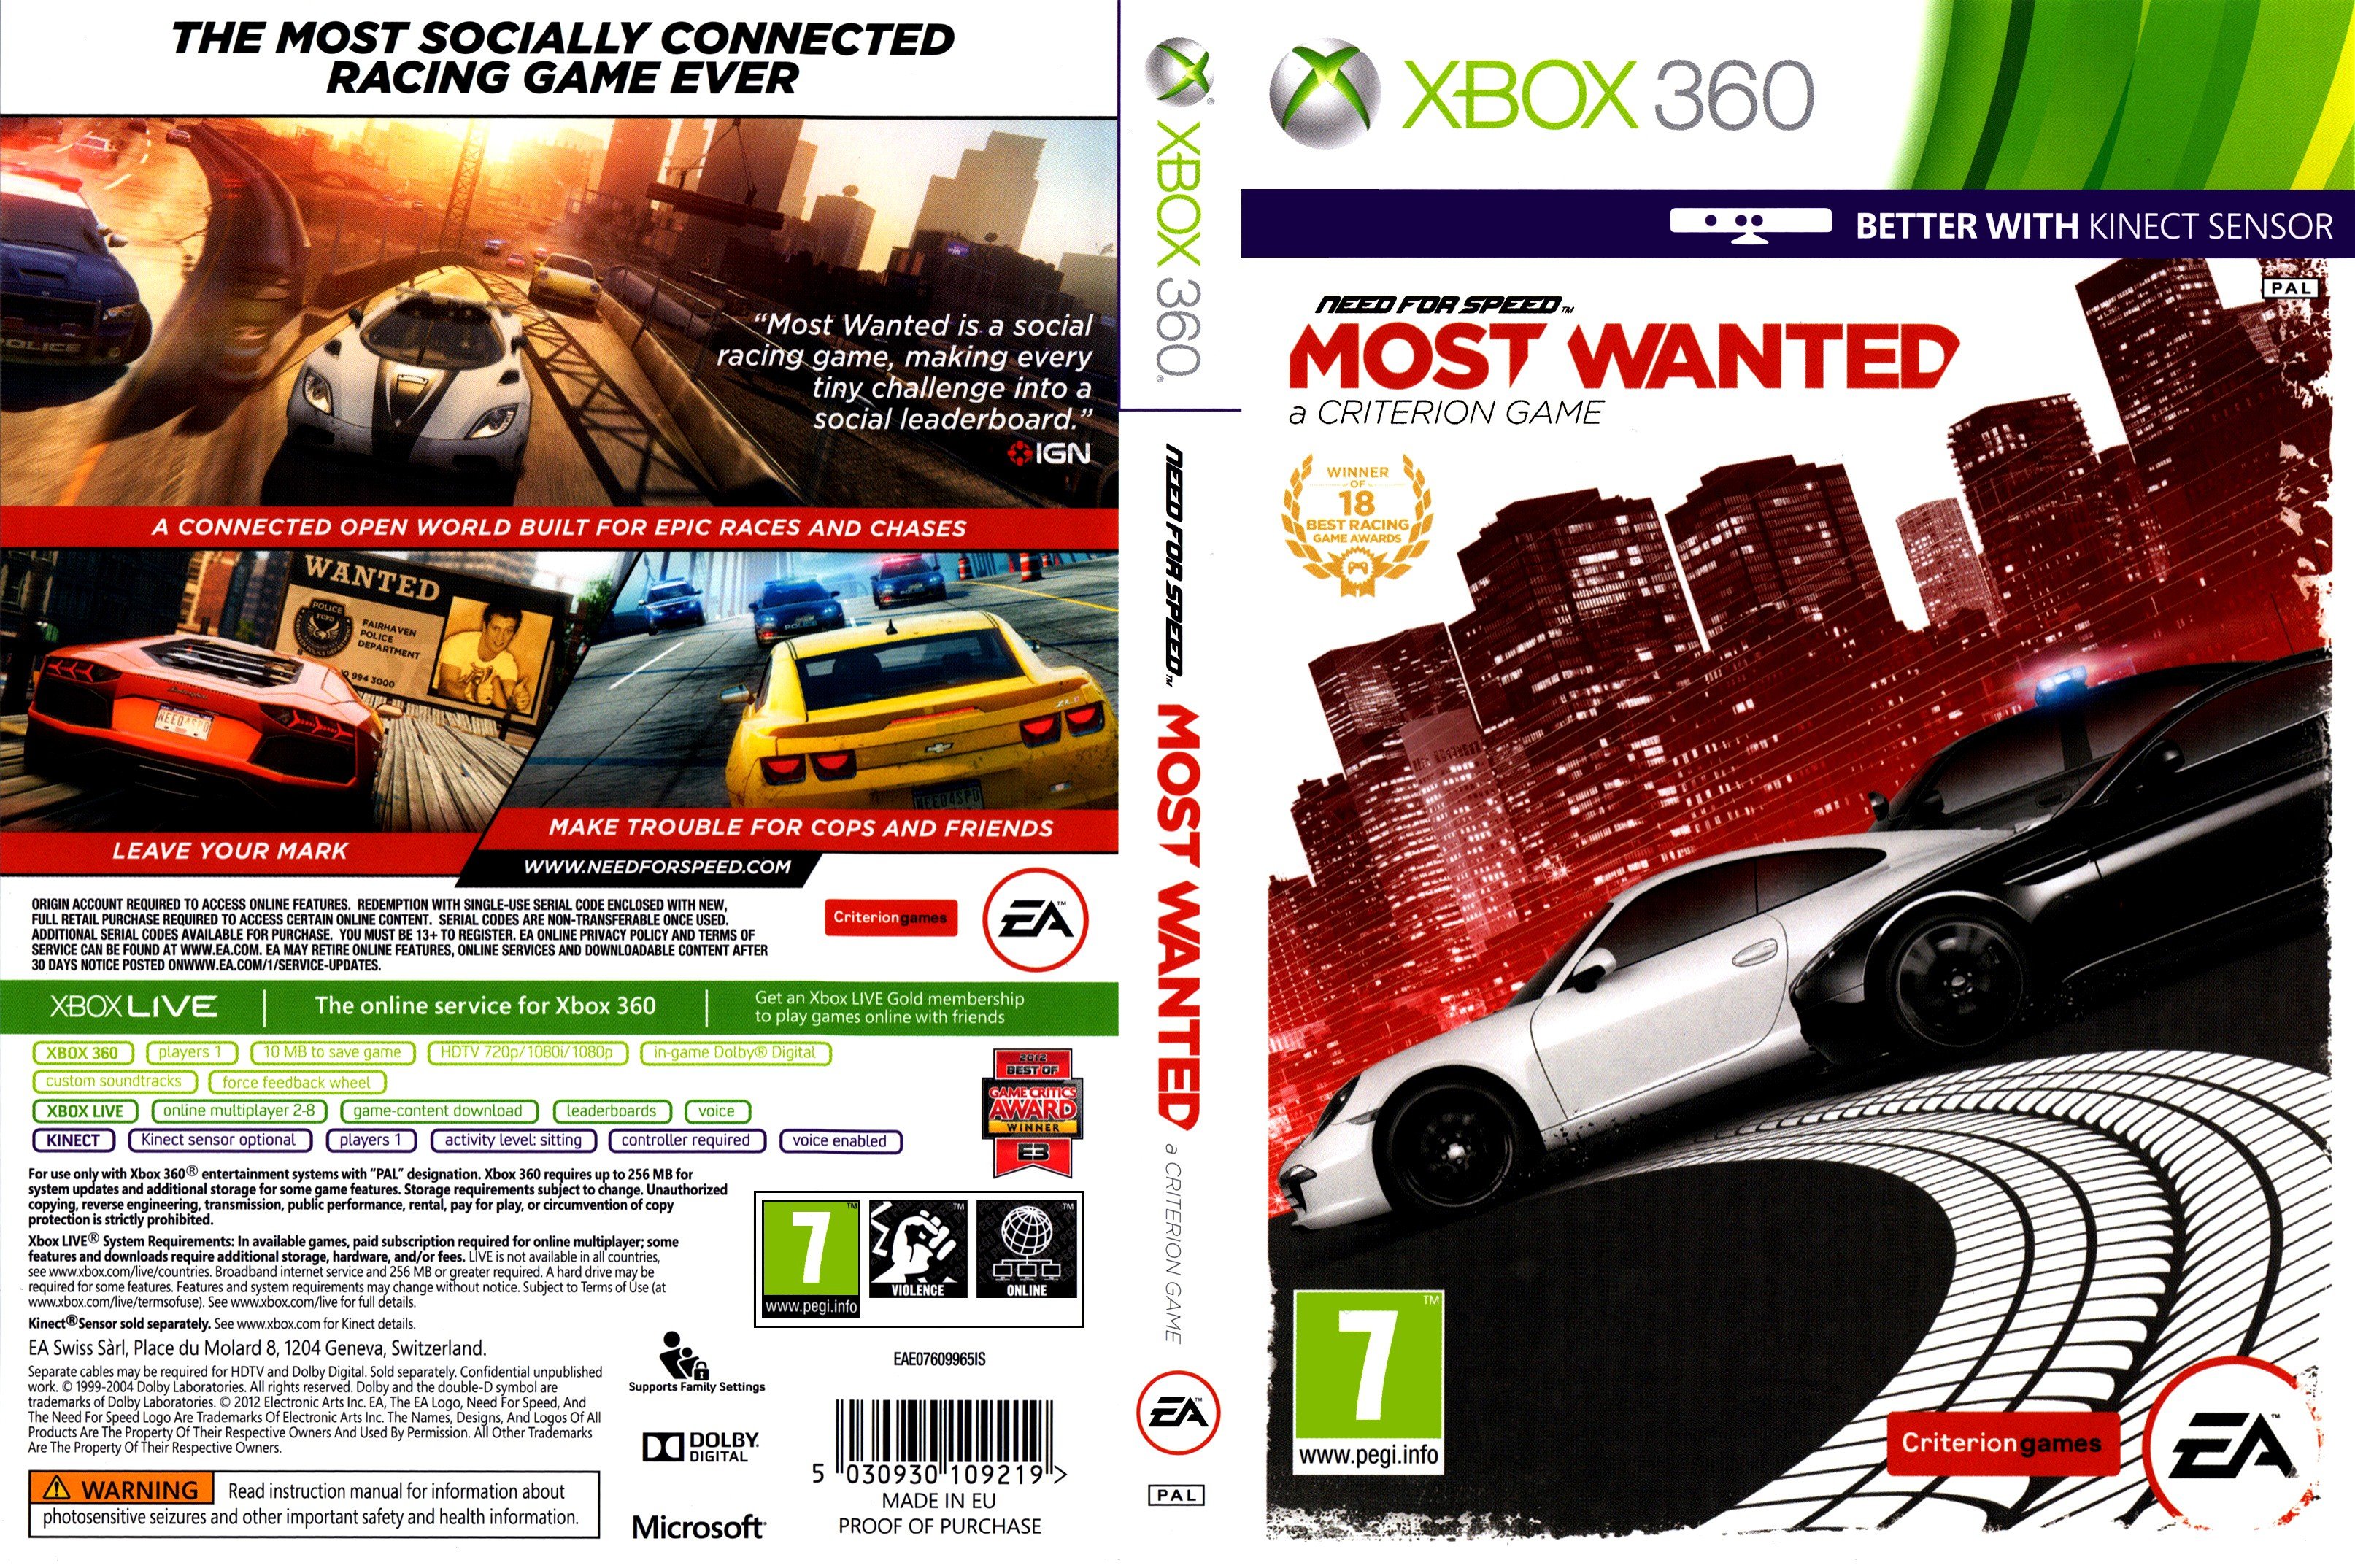 Код игры 360. Need for Speed Xbox 360 диск. NFS most wanted диск Xbox 360. Приставка игровая Xbox 360 need for Speed. NFS most wanted 2012 Xbox 360.